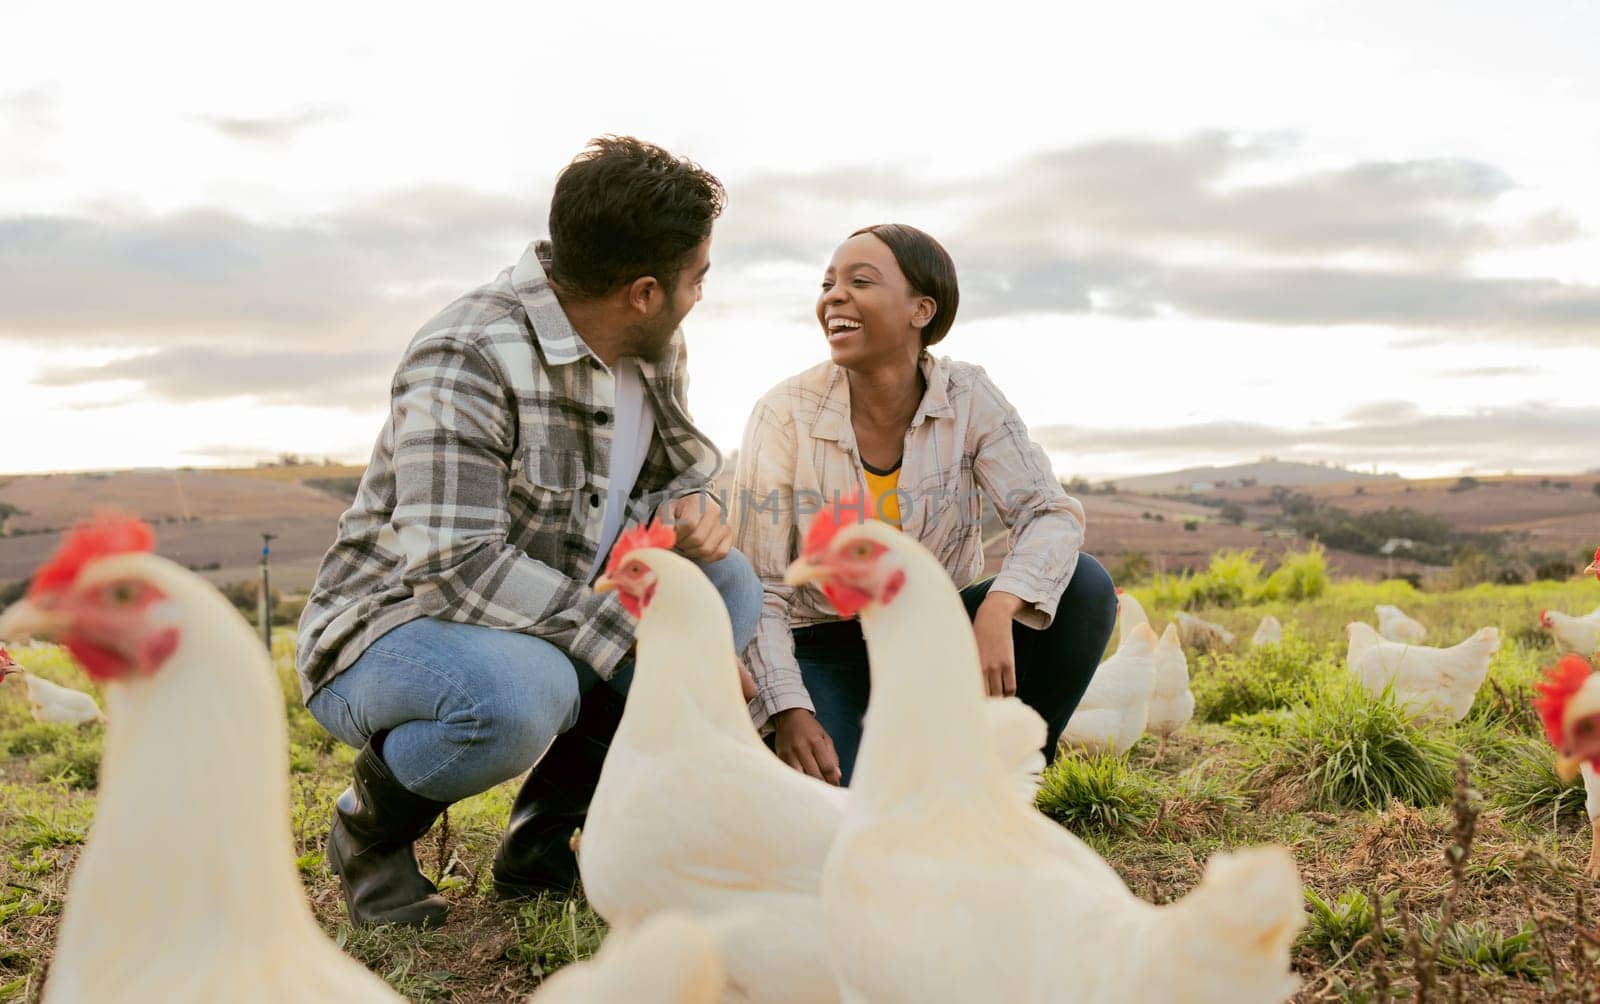 Farming, poultry and people with chicken outdoors doing check and feeding livestock. Agriculture, sustainability and man and woman working on poultry farm for healthy, organic and natural animals.